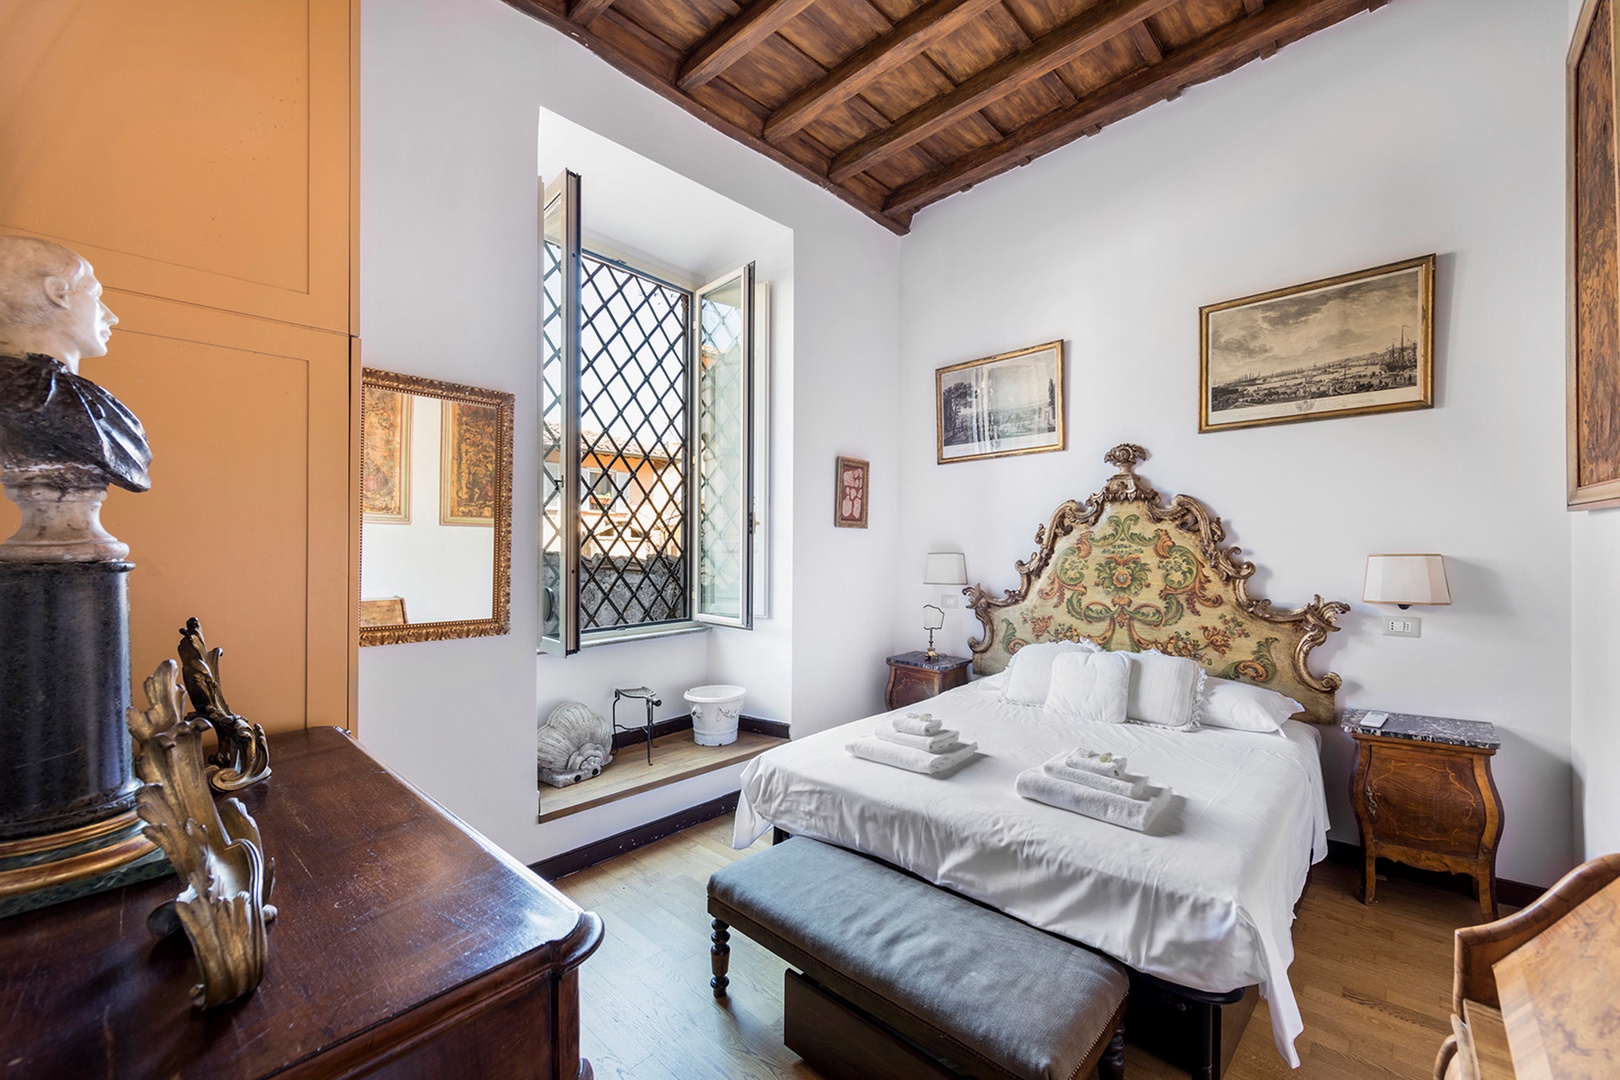 Bedroom 2 has a view overlooking the cupola of the Saint Agnese church of Piazza Navona